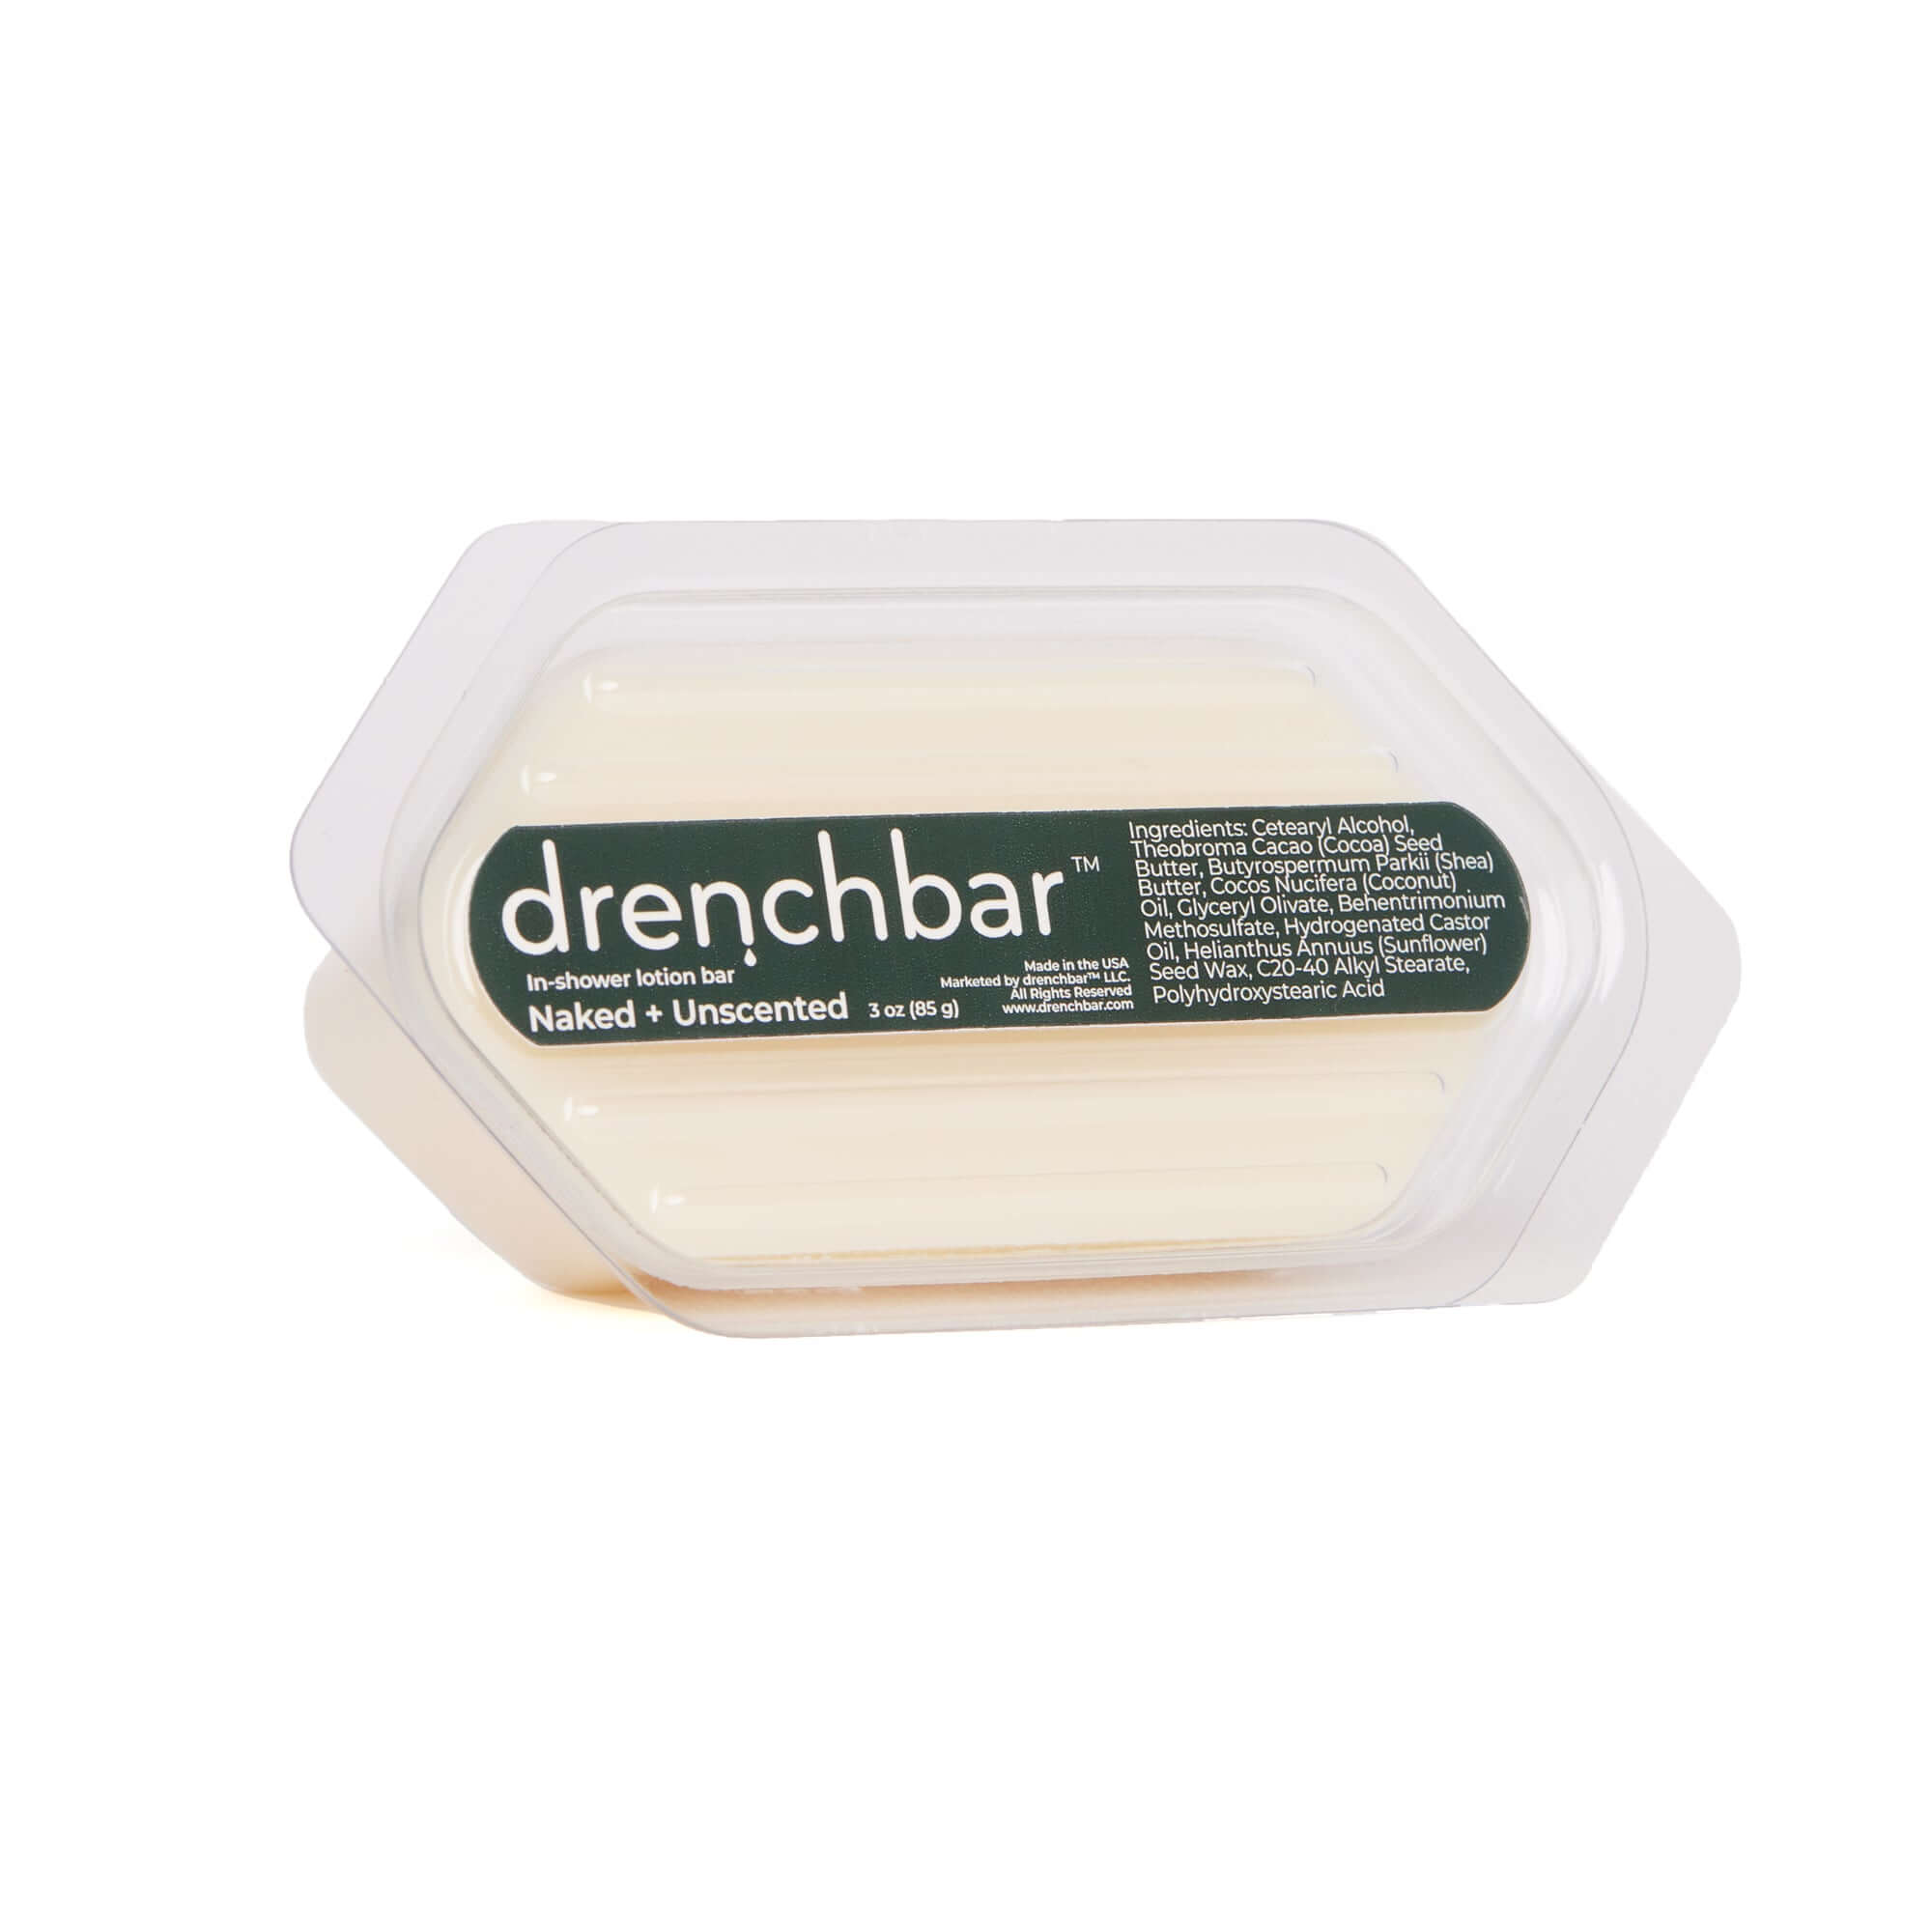 drenchbar unscented in-shower lotion bar to moisturize skin in the shower without using lotion